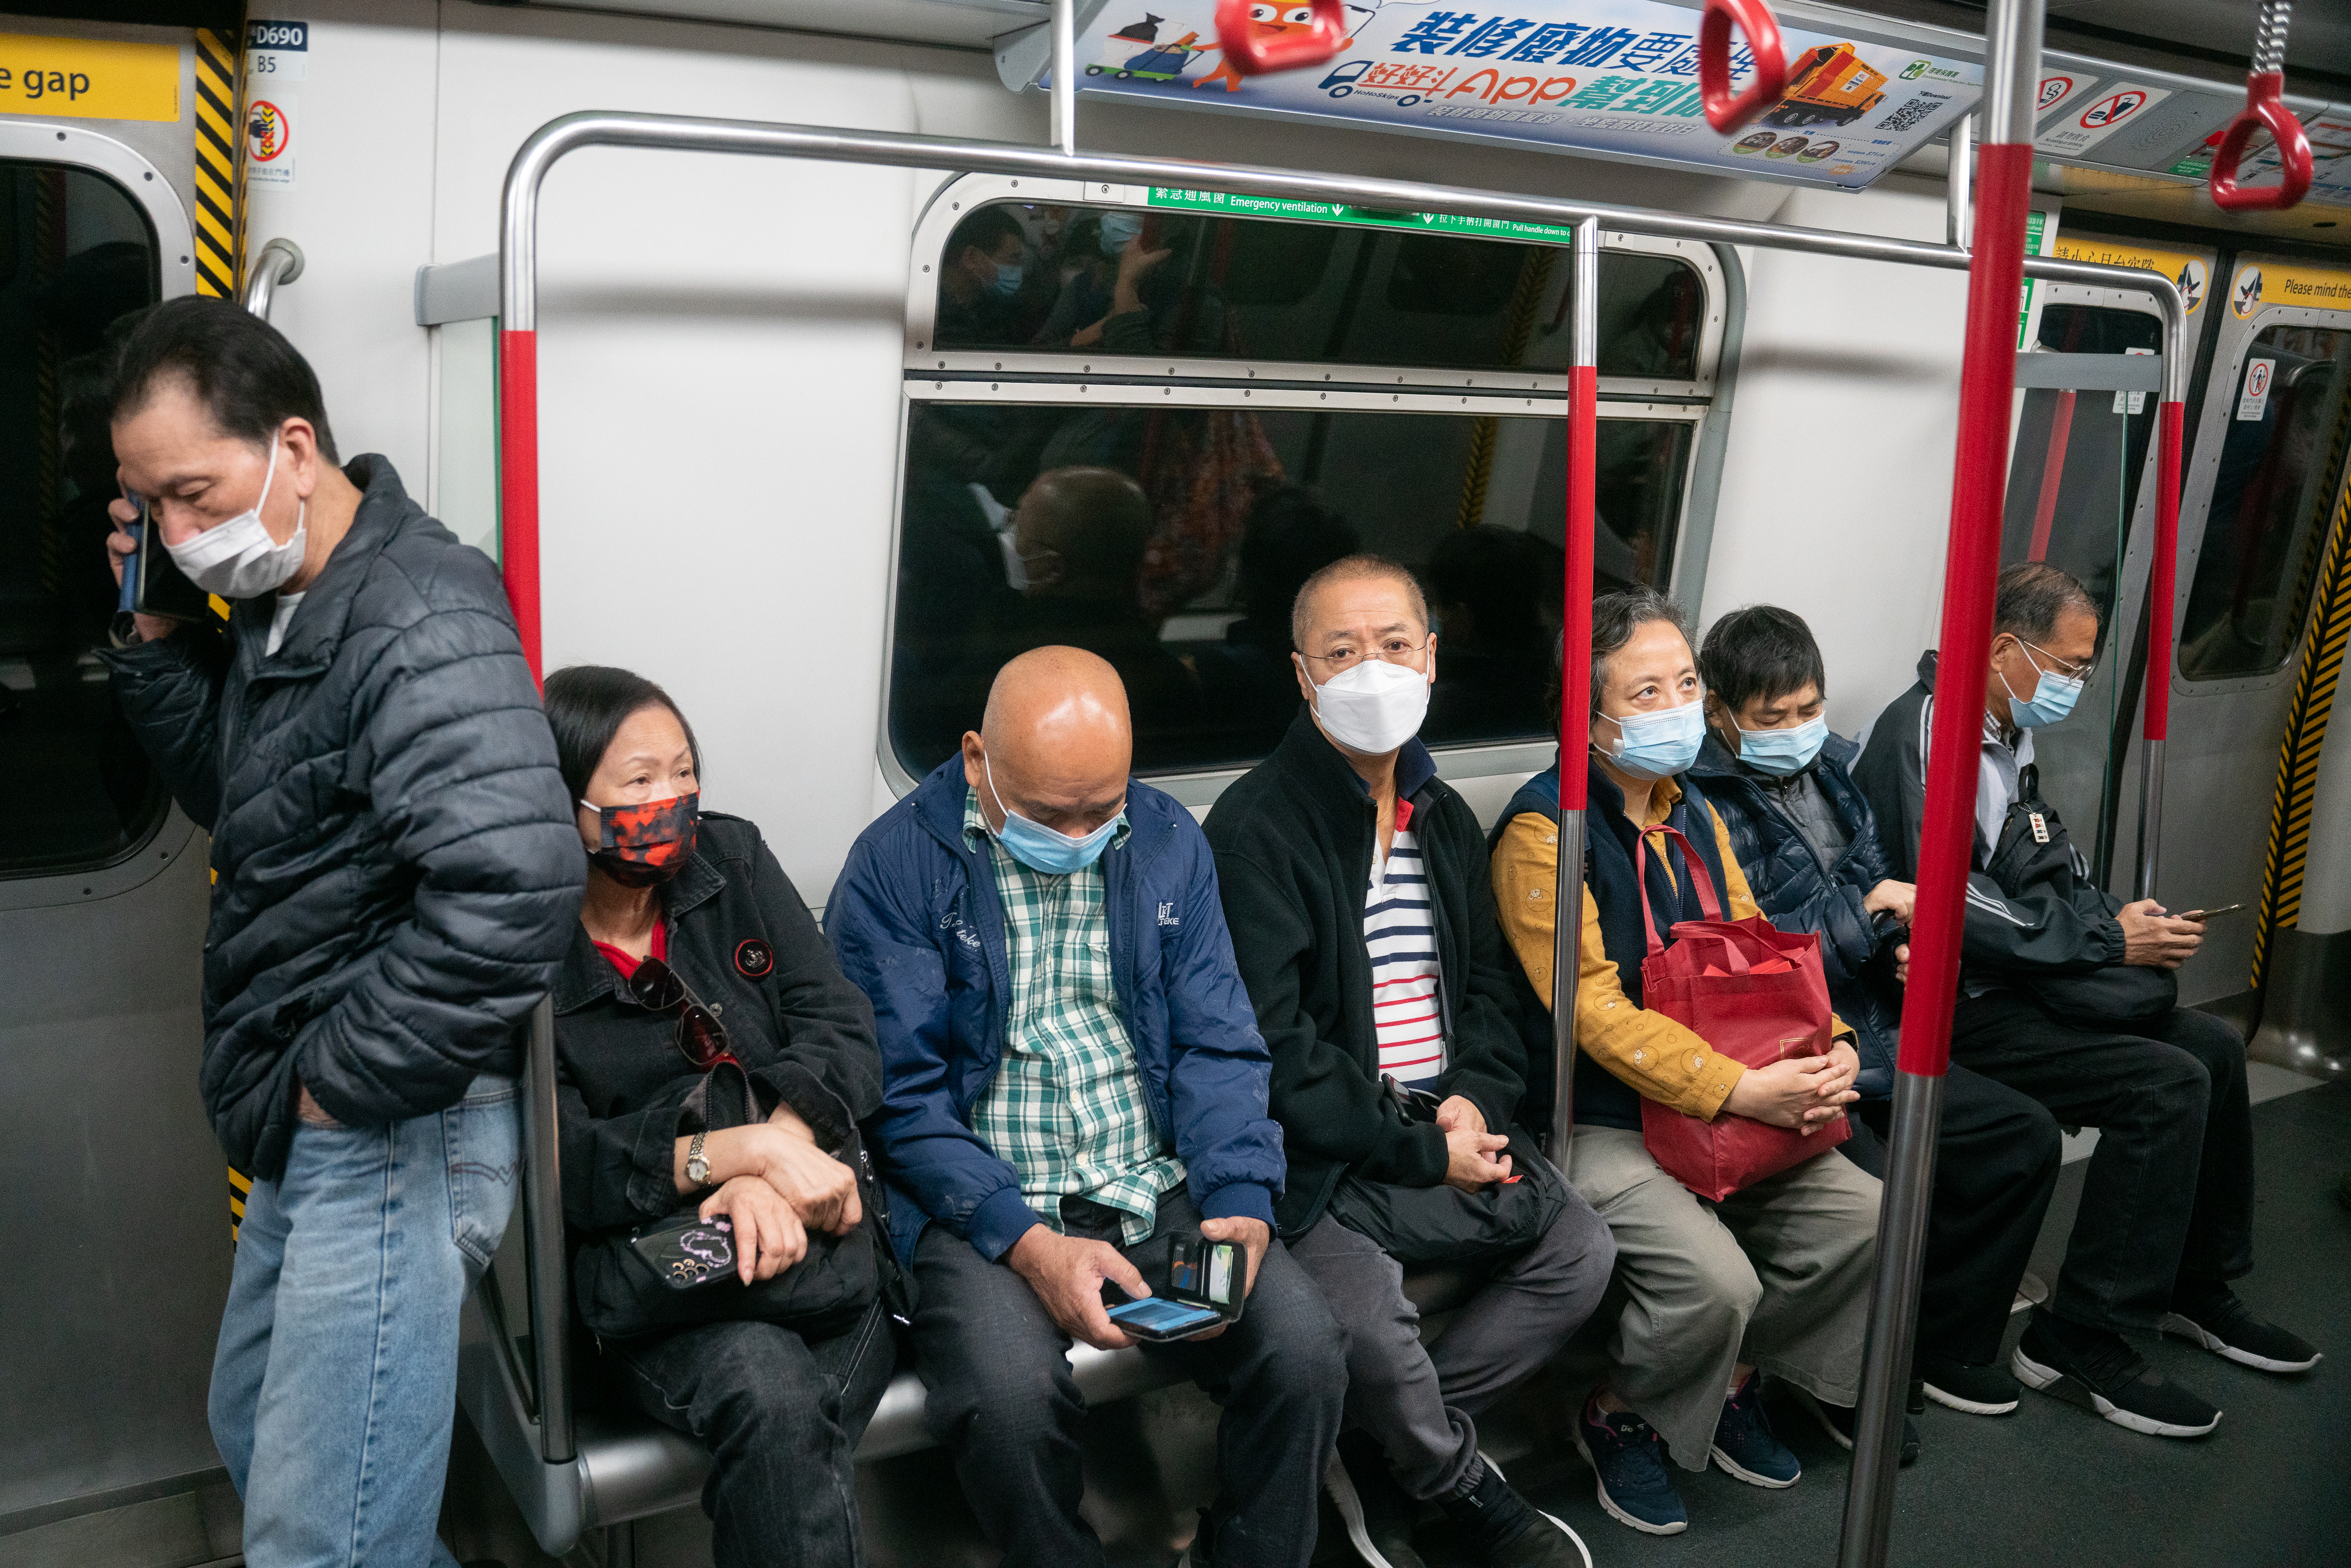 People on MTR train with mask on. (Photo Credit: Matthew Cheng)